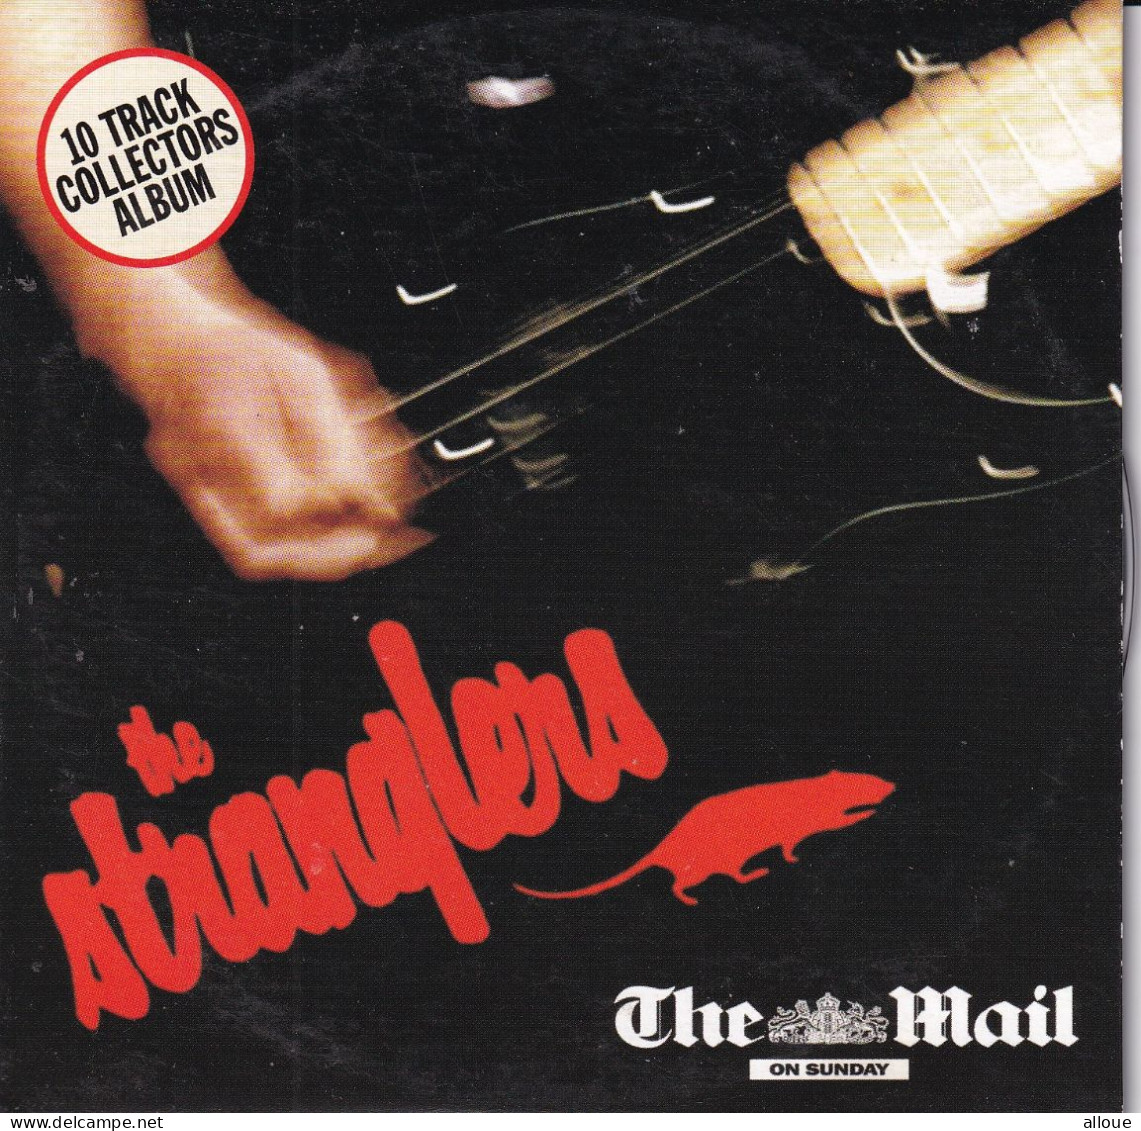 THE STRANGLERS  - CD THE MAIL ON SUNDAY - POCHETTE CARTON 10 TRACK COLLECTOR'S ALBUM - Andere - Engelstalig